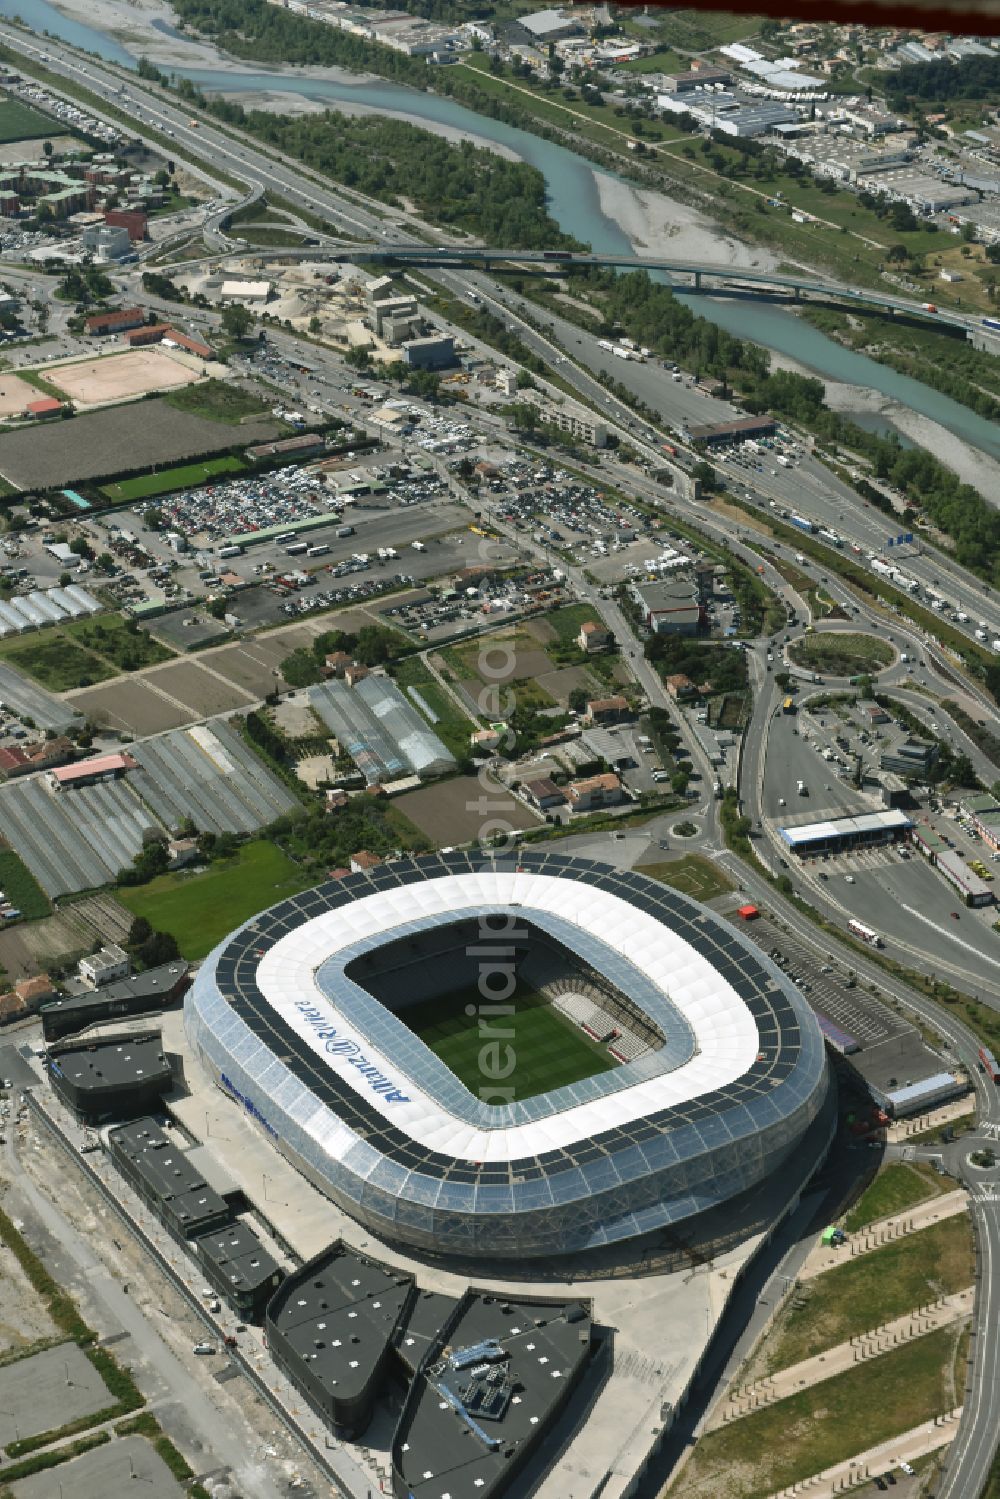 Nizza from above - Sports facility grounds of the Arena stadium Allianz Riviera Bd. des Jardiniers in Nice in Provence-Alpes-Cote d'Azur, France